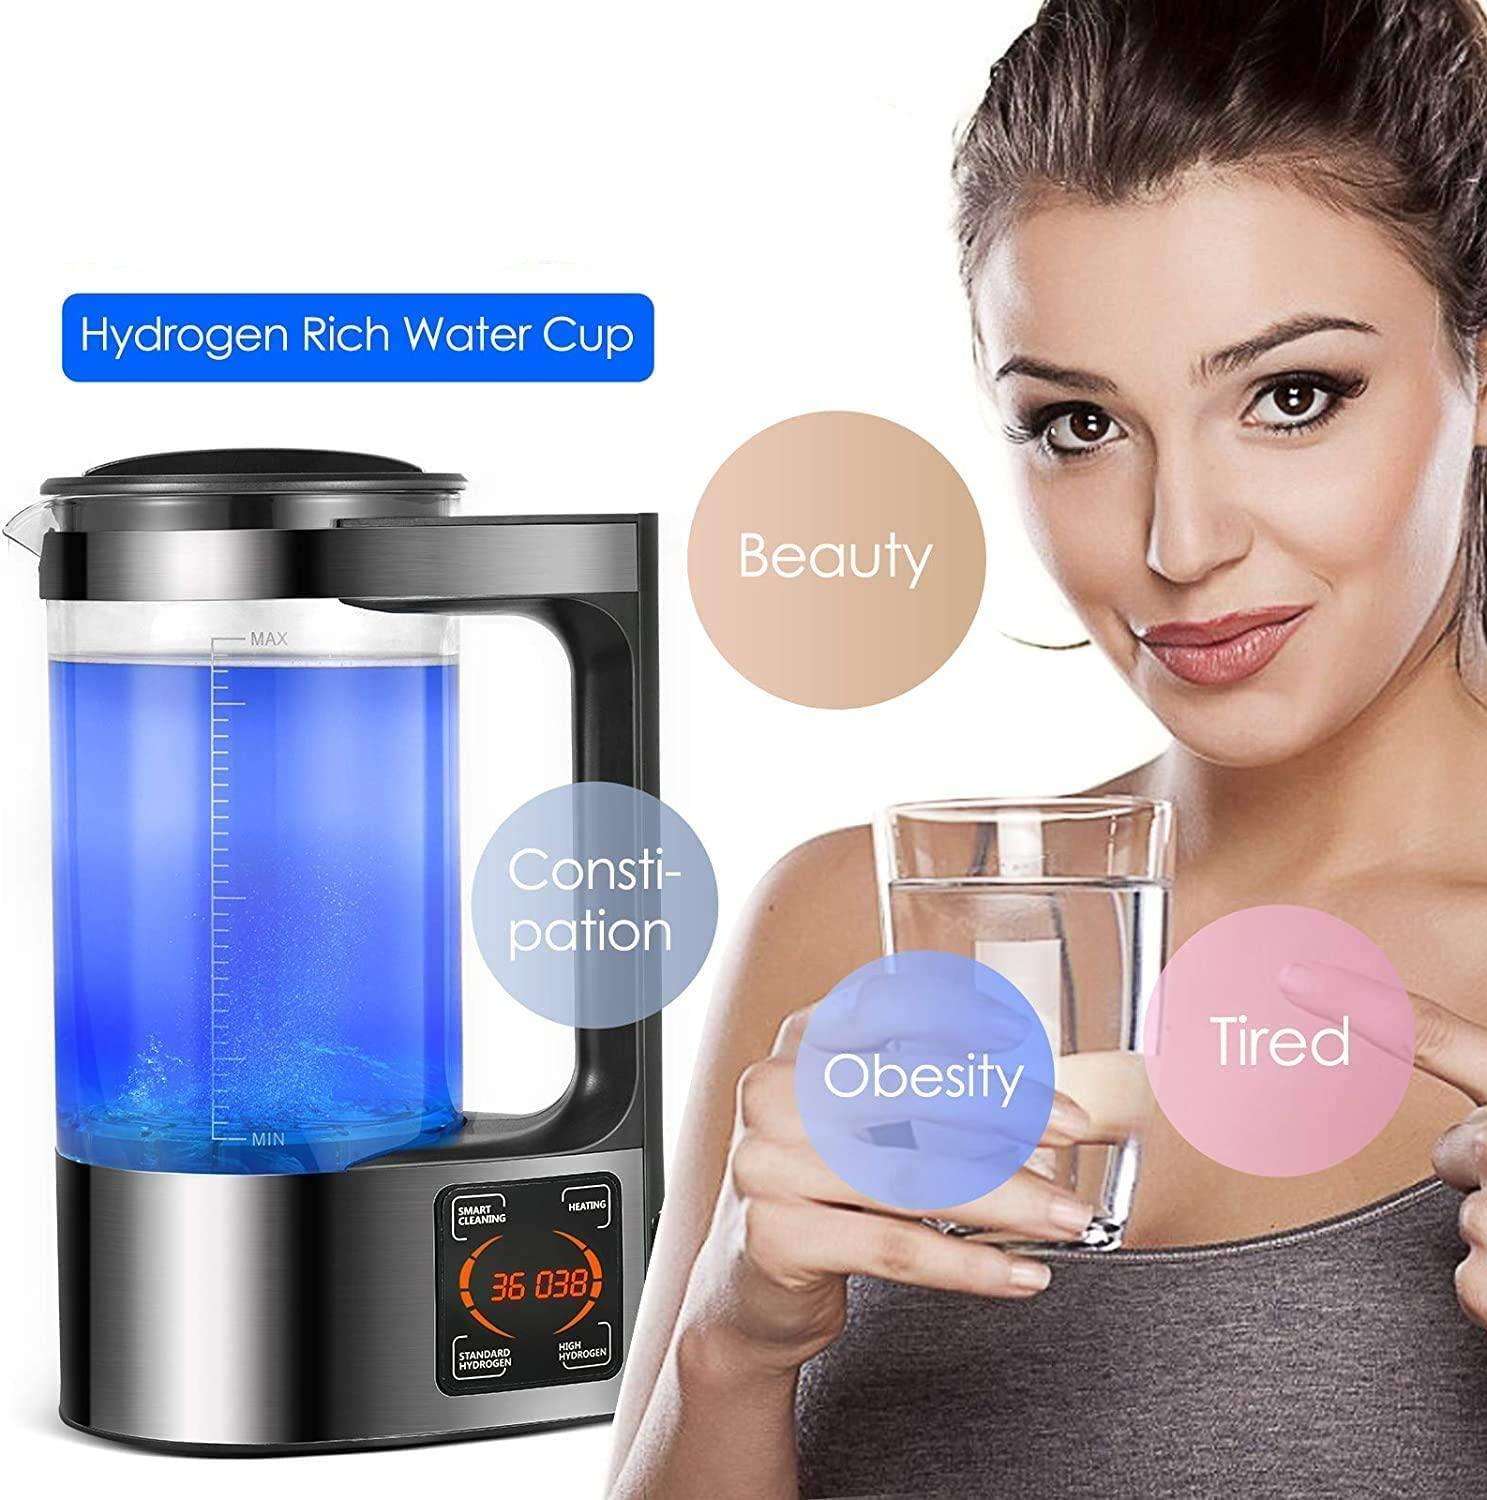 Hydrogen-Rich Water Bottle Water Ion Hydrogen Alkaline Water Maker with Thermostat Digital Touch Control LED Display InLoveArts Hydrogen Water Generator 2L Large Capacity Portable